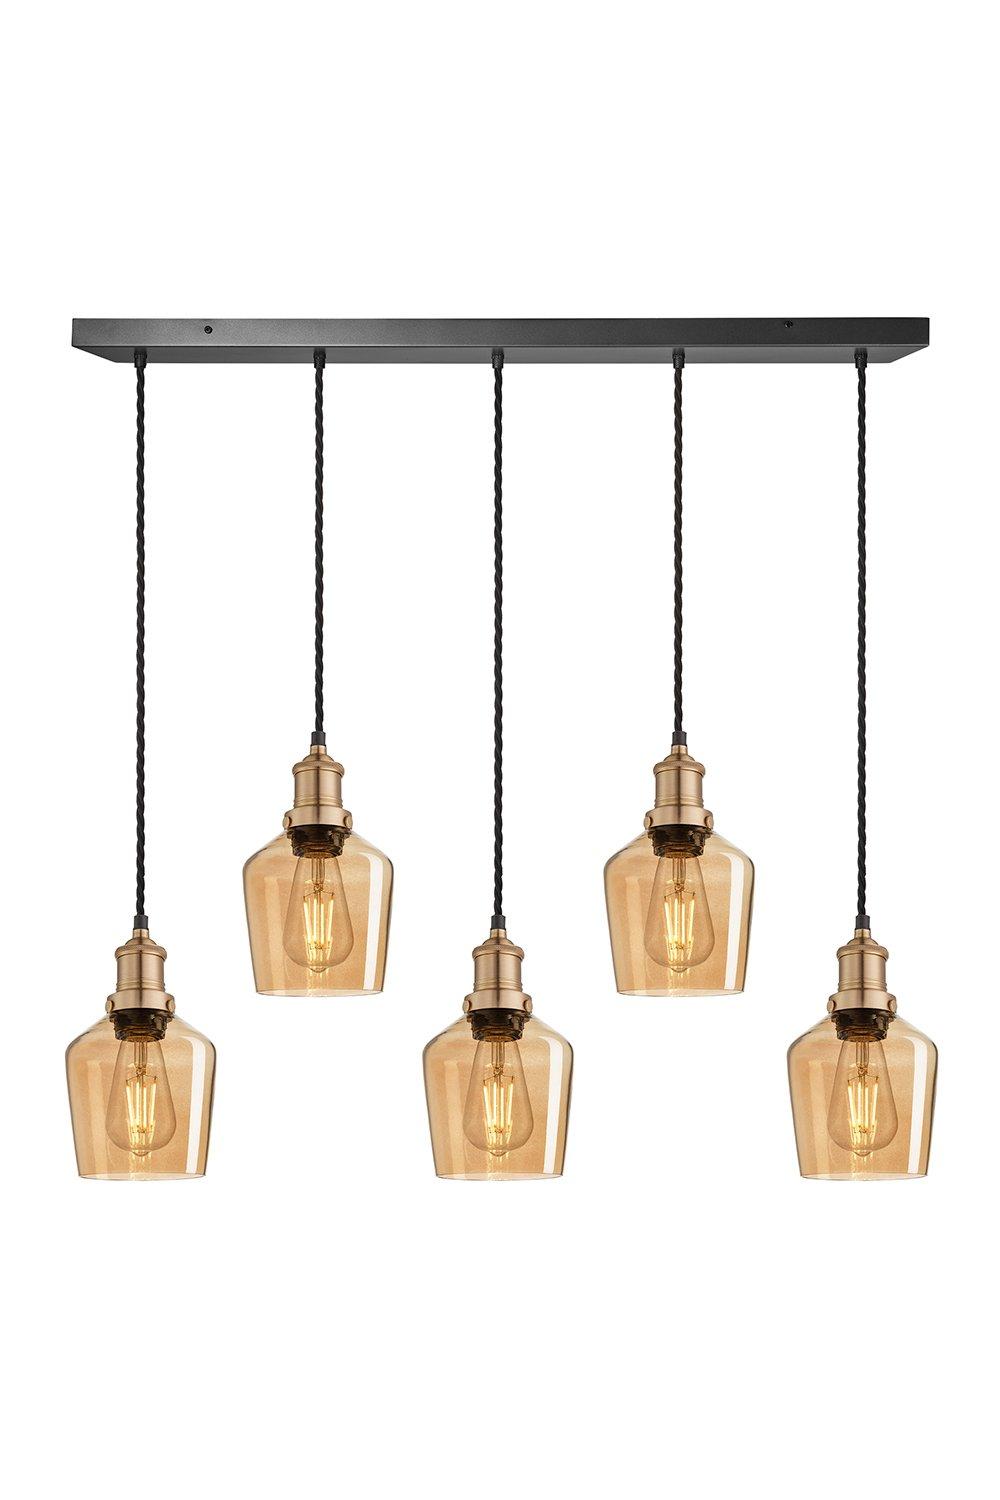 Brooklyn Tinted Glass Schoolhouse 5 Wire Cluster Lights, 5.5 inch, Amber, Brass holder